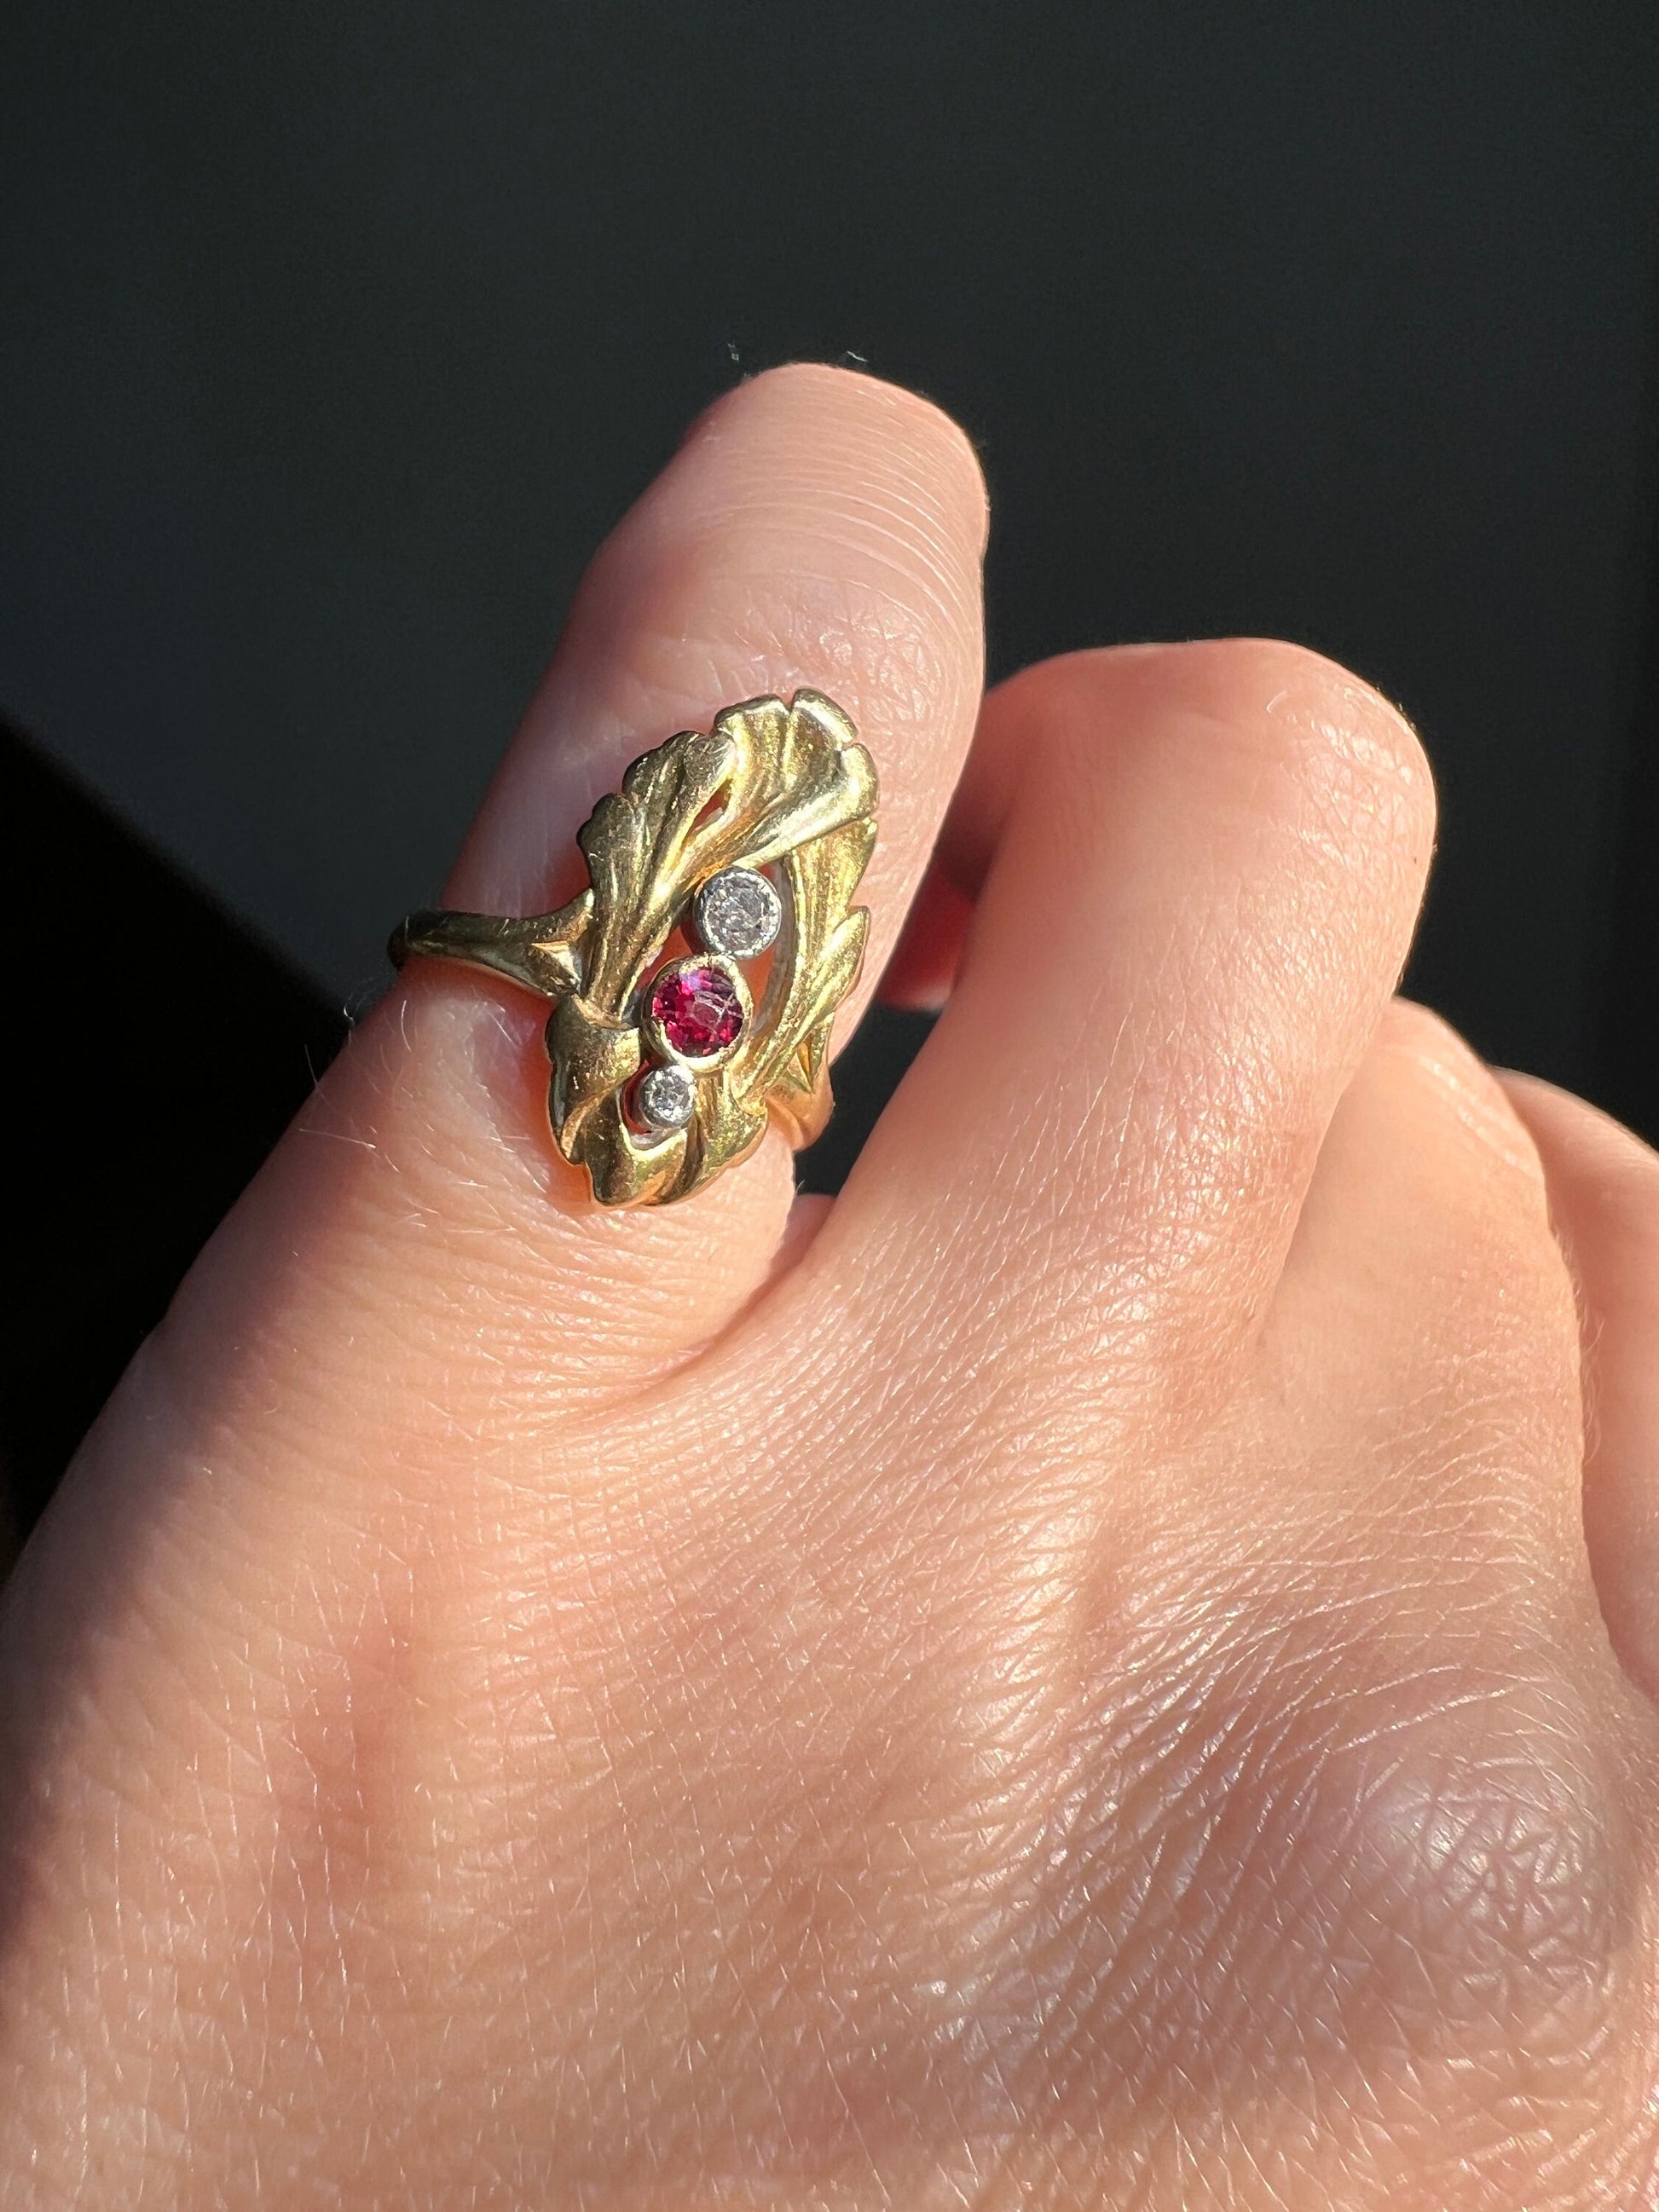 Ginkgo LEAF Art Nouveau French Antique RUBY Old Cut Diamond Ring 18k Gold Red Pinky Figural Belle Epoque Victorian Three Stone Red PC Pinky